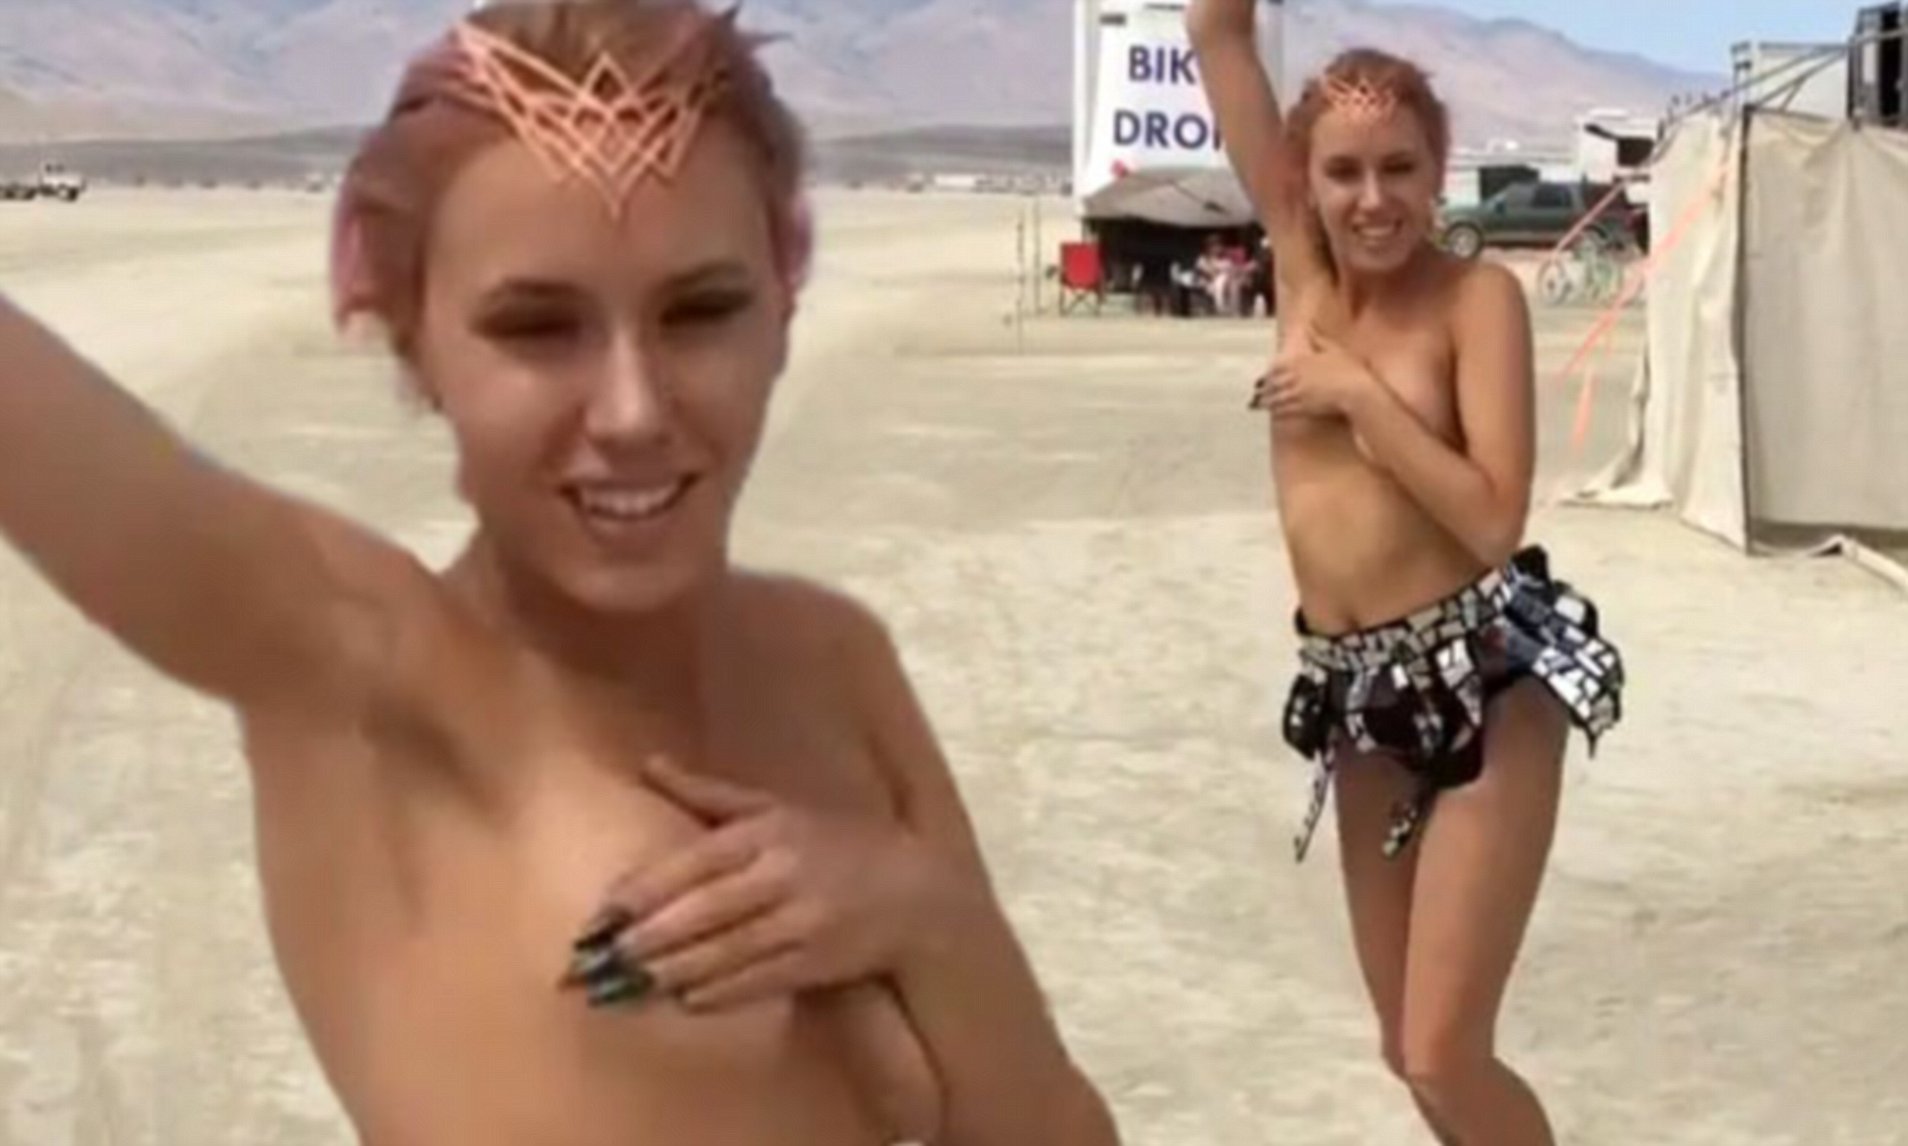 alexis leanne recommends Burning Man 2017 Nudity